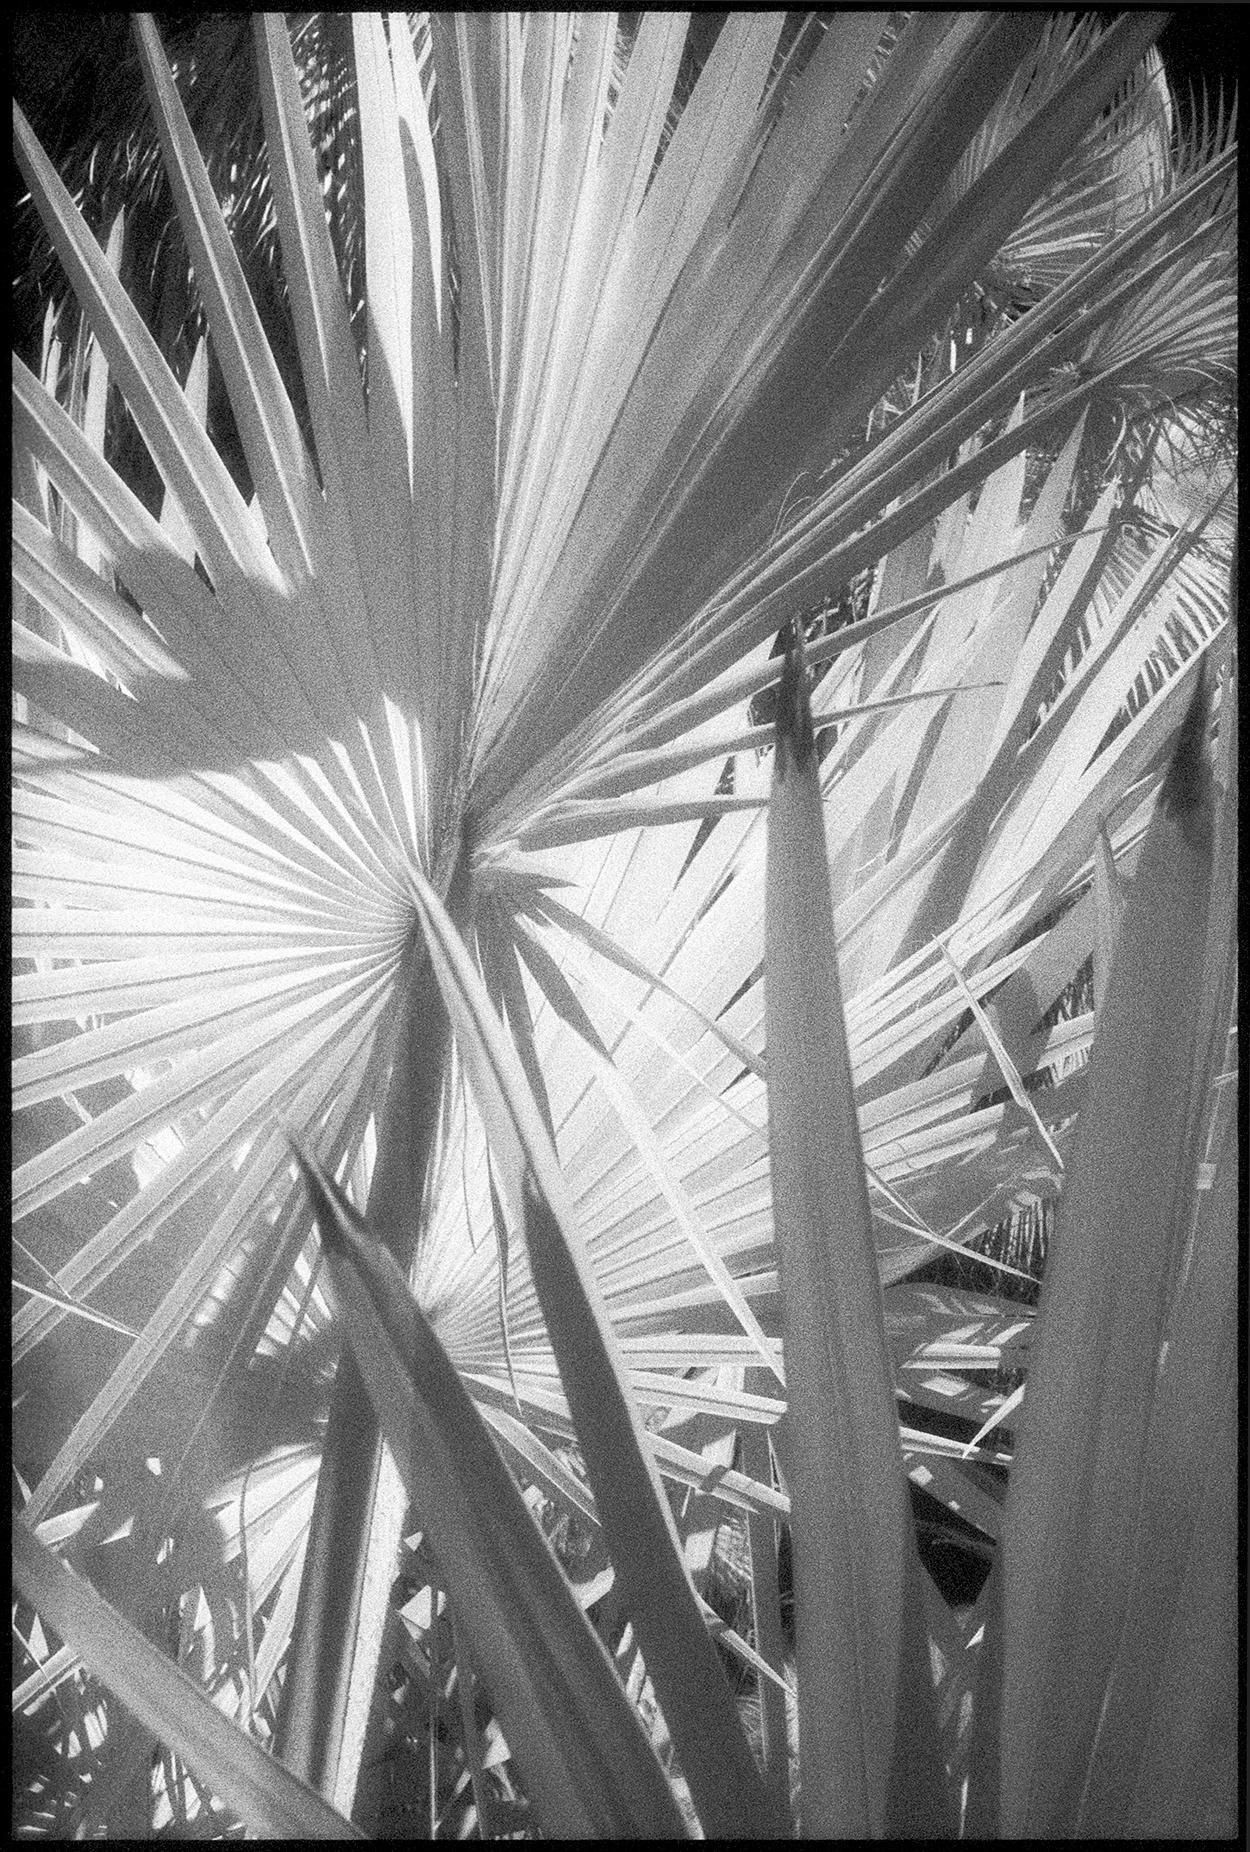 Unframed: 9.5 x 14"

"Huntington Gardens XLVI" is part of a more extensive series of photographs Alfano has created over the past few years. Within this series is a subset of photographs where he abstracts palm fronds. Follow our storefront or